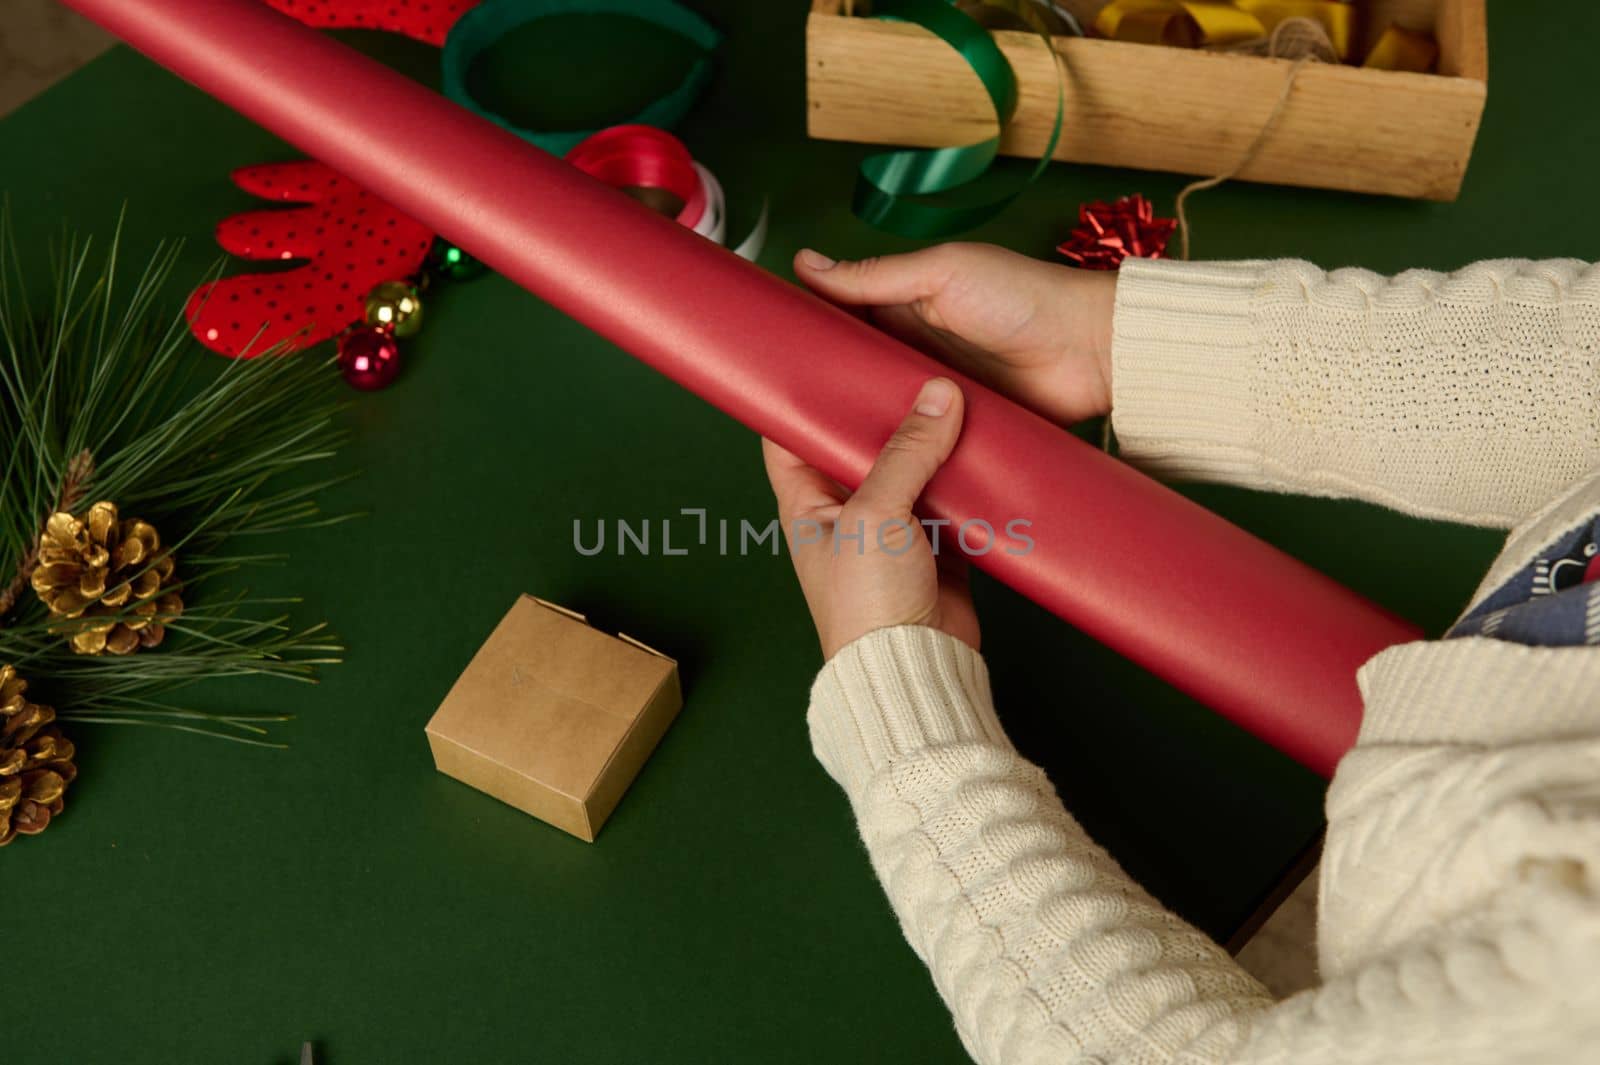 Top view woman's hands hold gift wrapping paper of red color while packing Christmas or New Year's presents, on green background. Festive decorations in wooden crate.Boxing Day. Xmas. December 25th